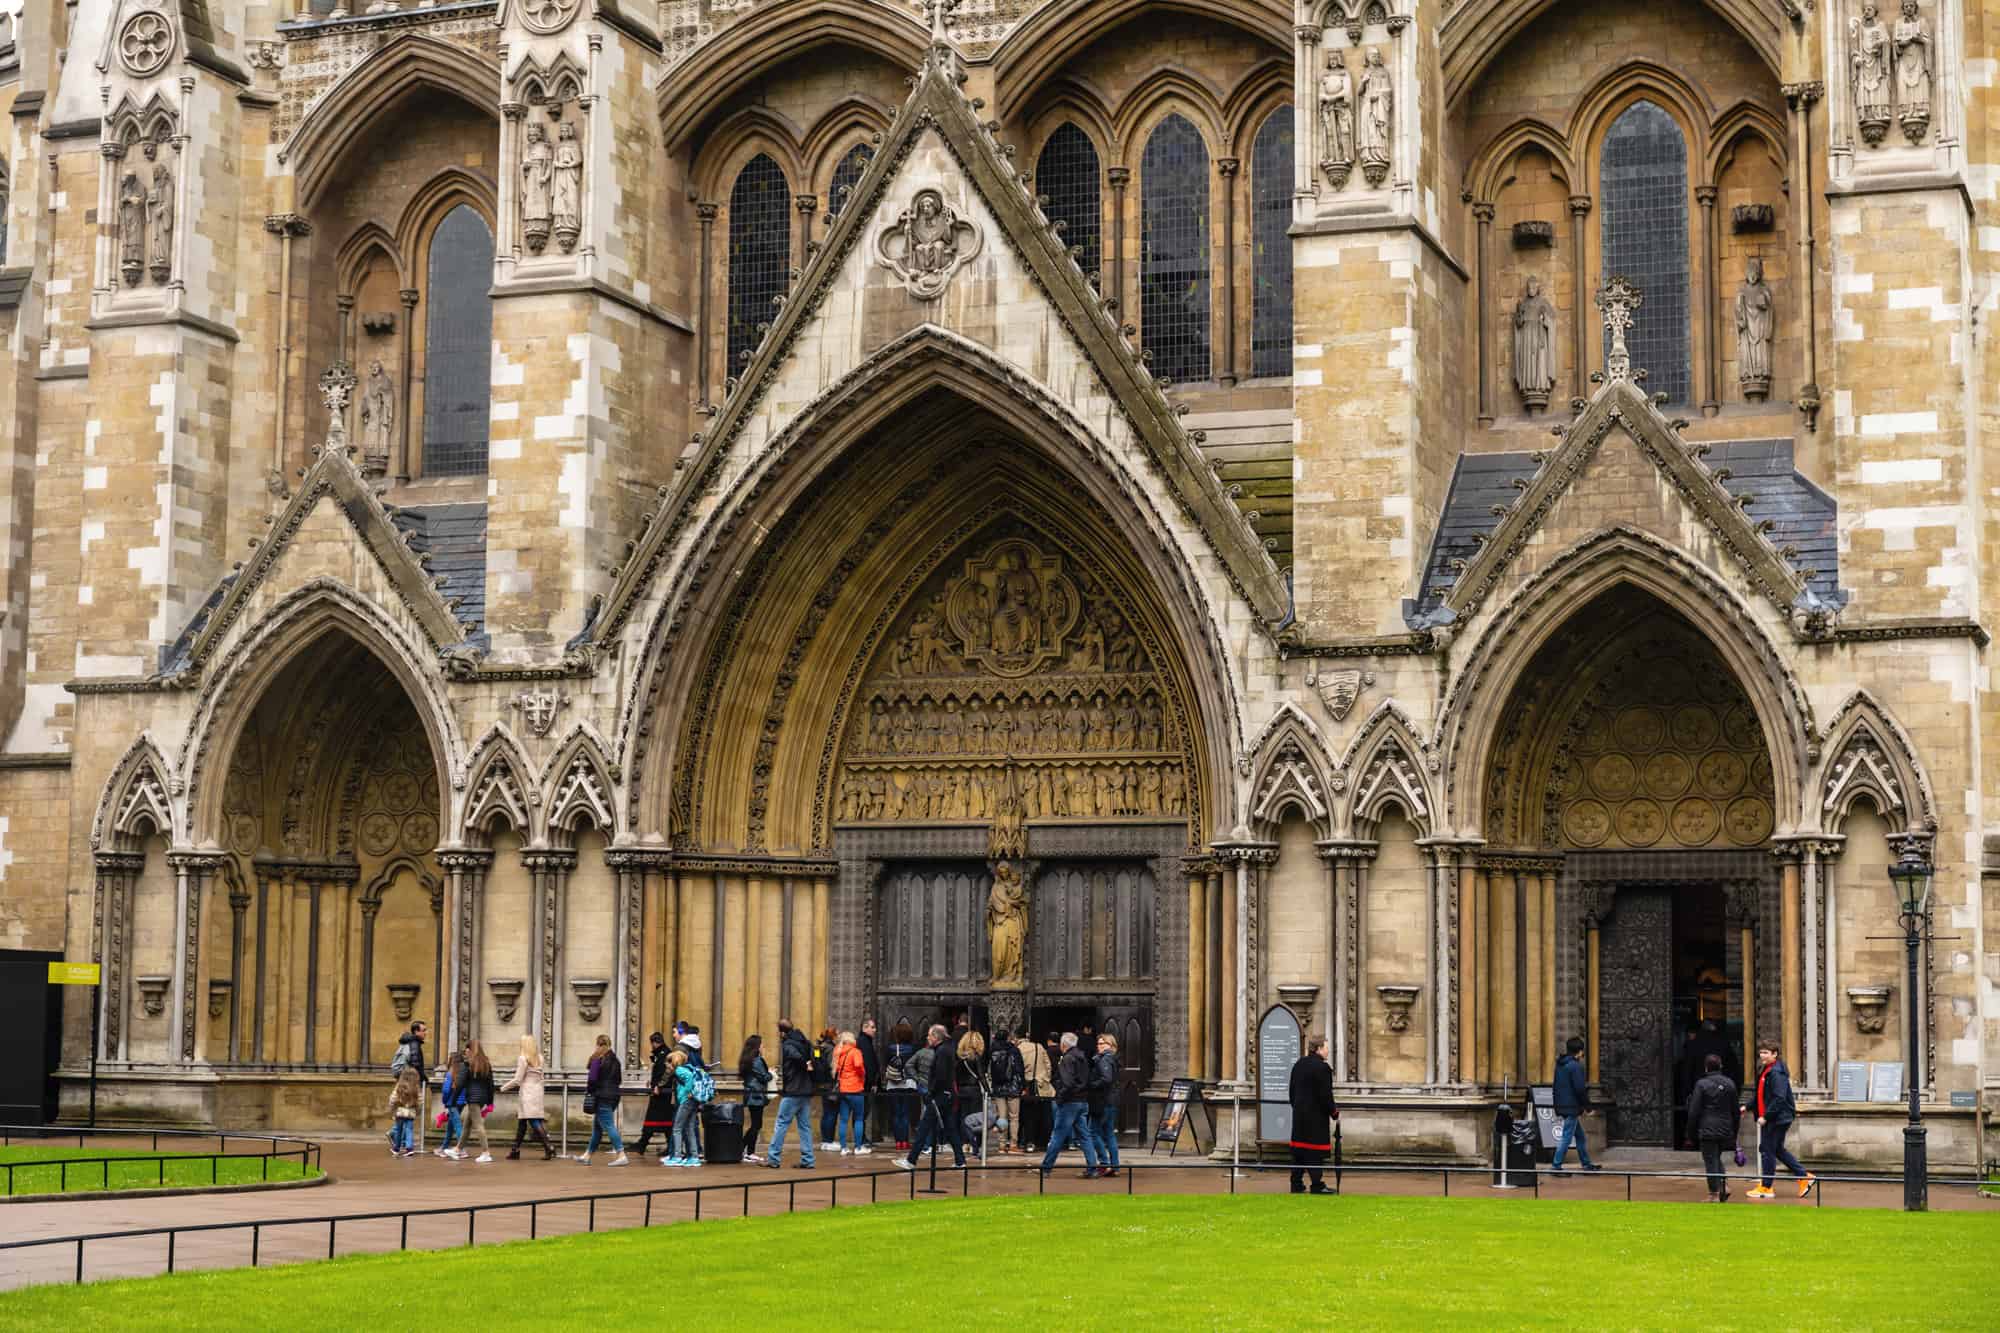 London, Houses Of Parliament Tour, Hero Sliders, London-Fully-Guided-Houses-Of-Parliament-Tour-With-Special-Access-No-Wait-Westminster-Abbey-Tour-Hero-Slider-Medium.